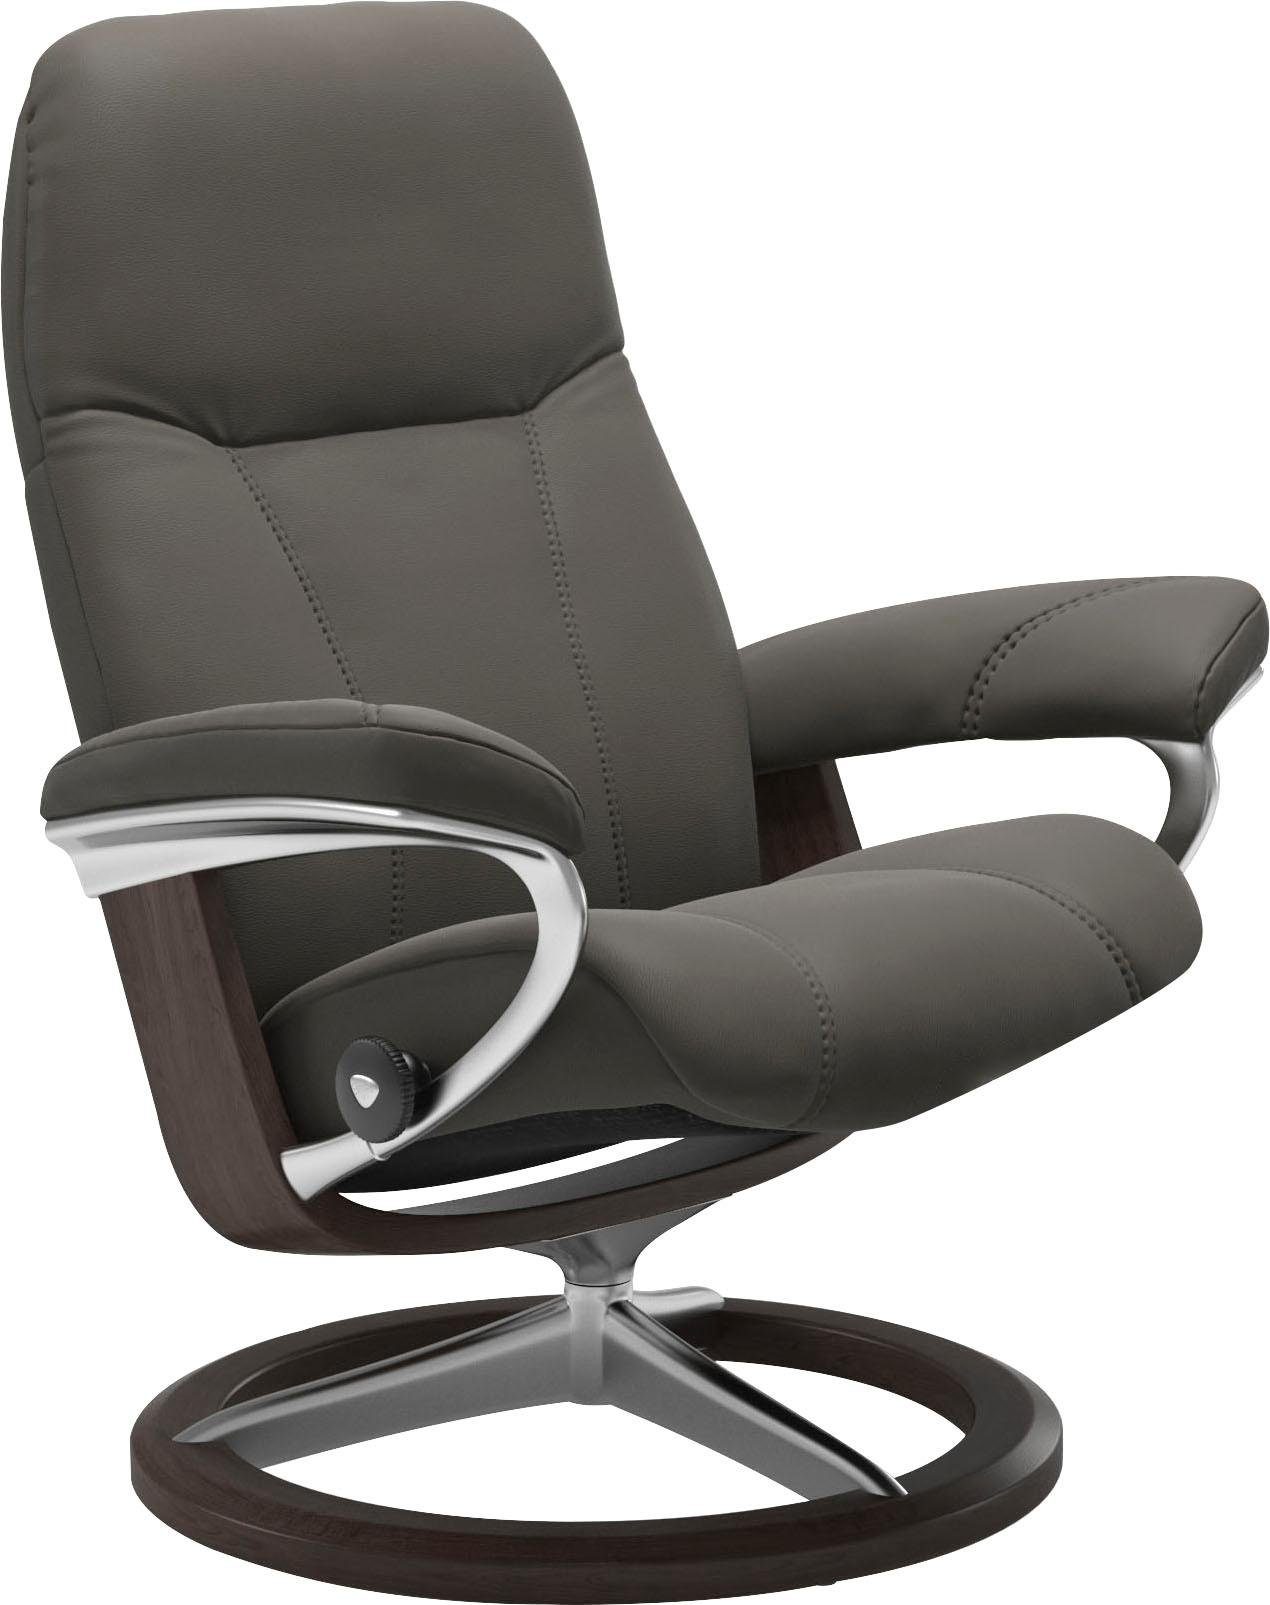 Wenge Base, Relaxsessel Signature Stressless® Gestell L, mit Consul, Größe